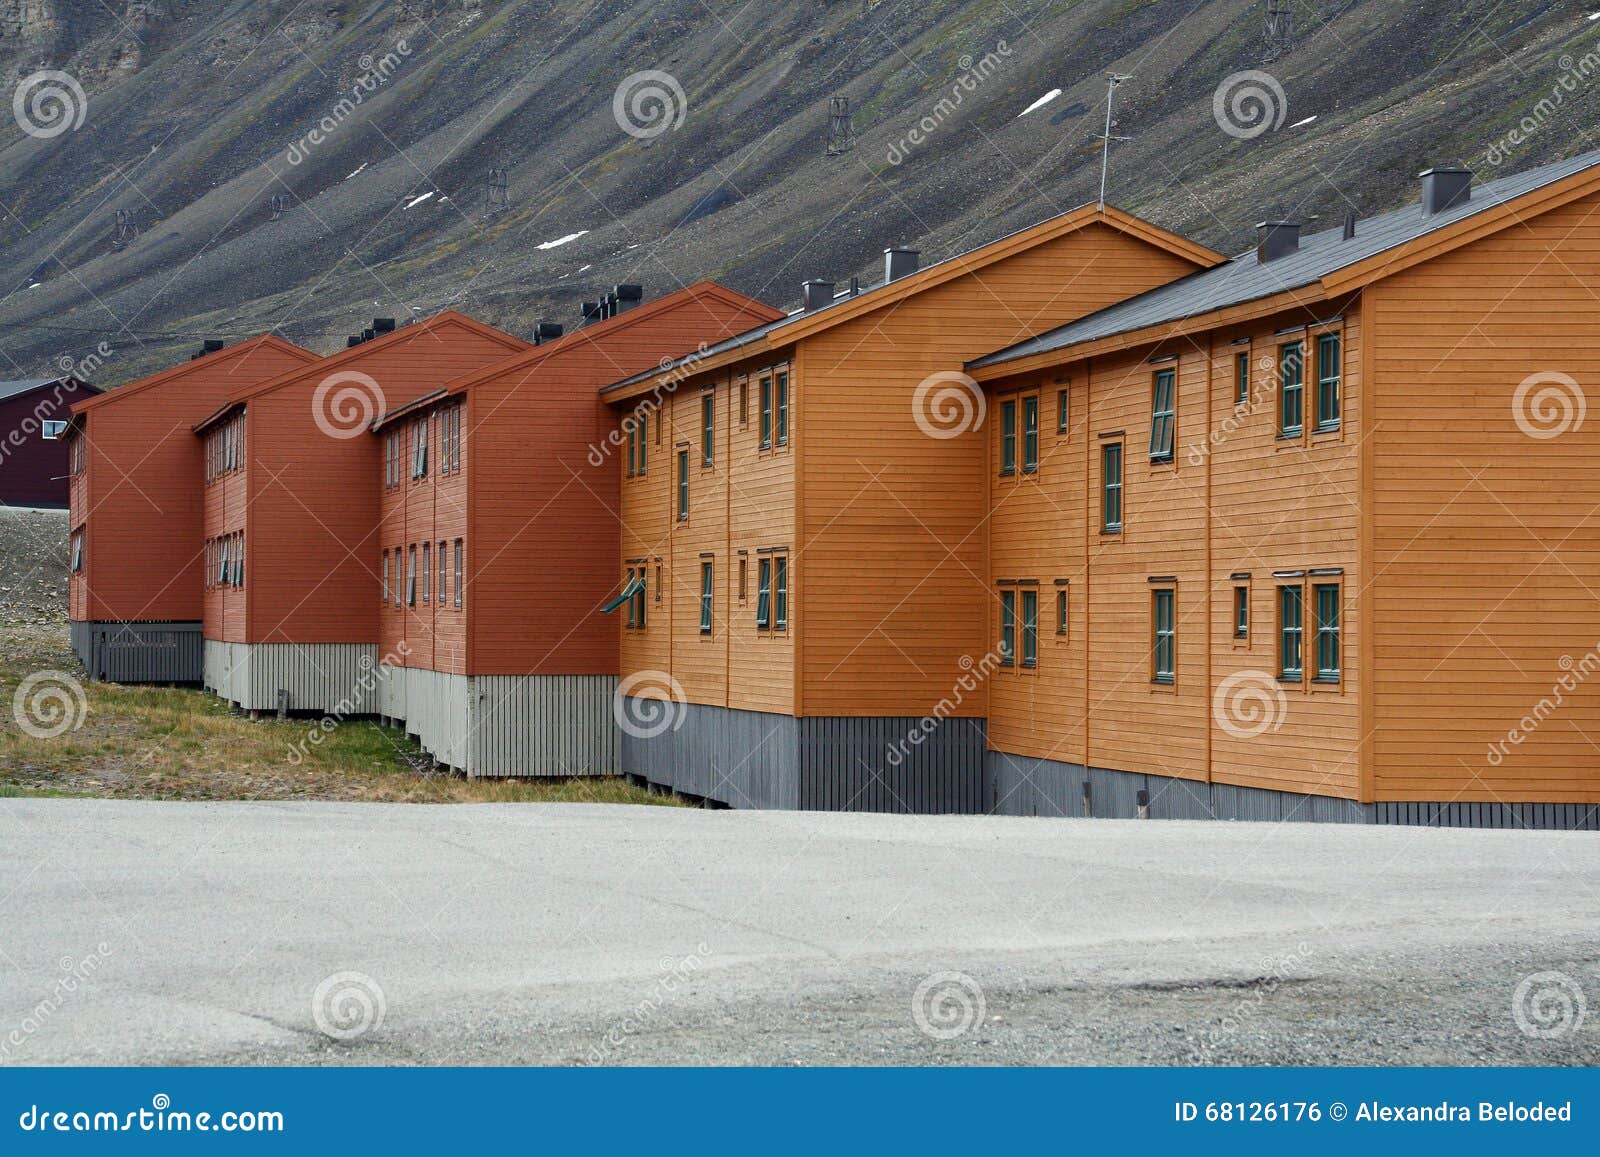 wooden miners houses on svalbard or spitsbergen